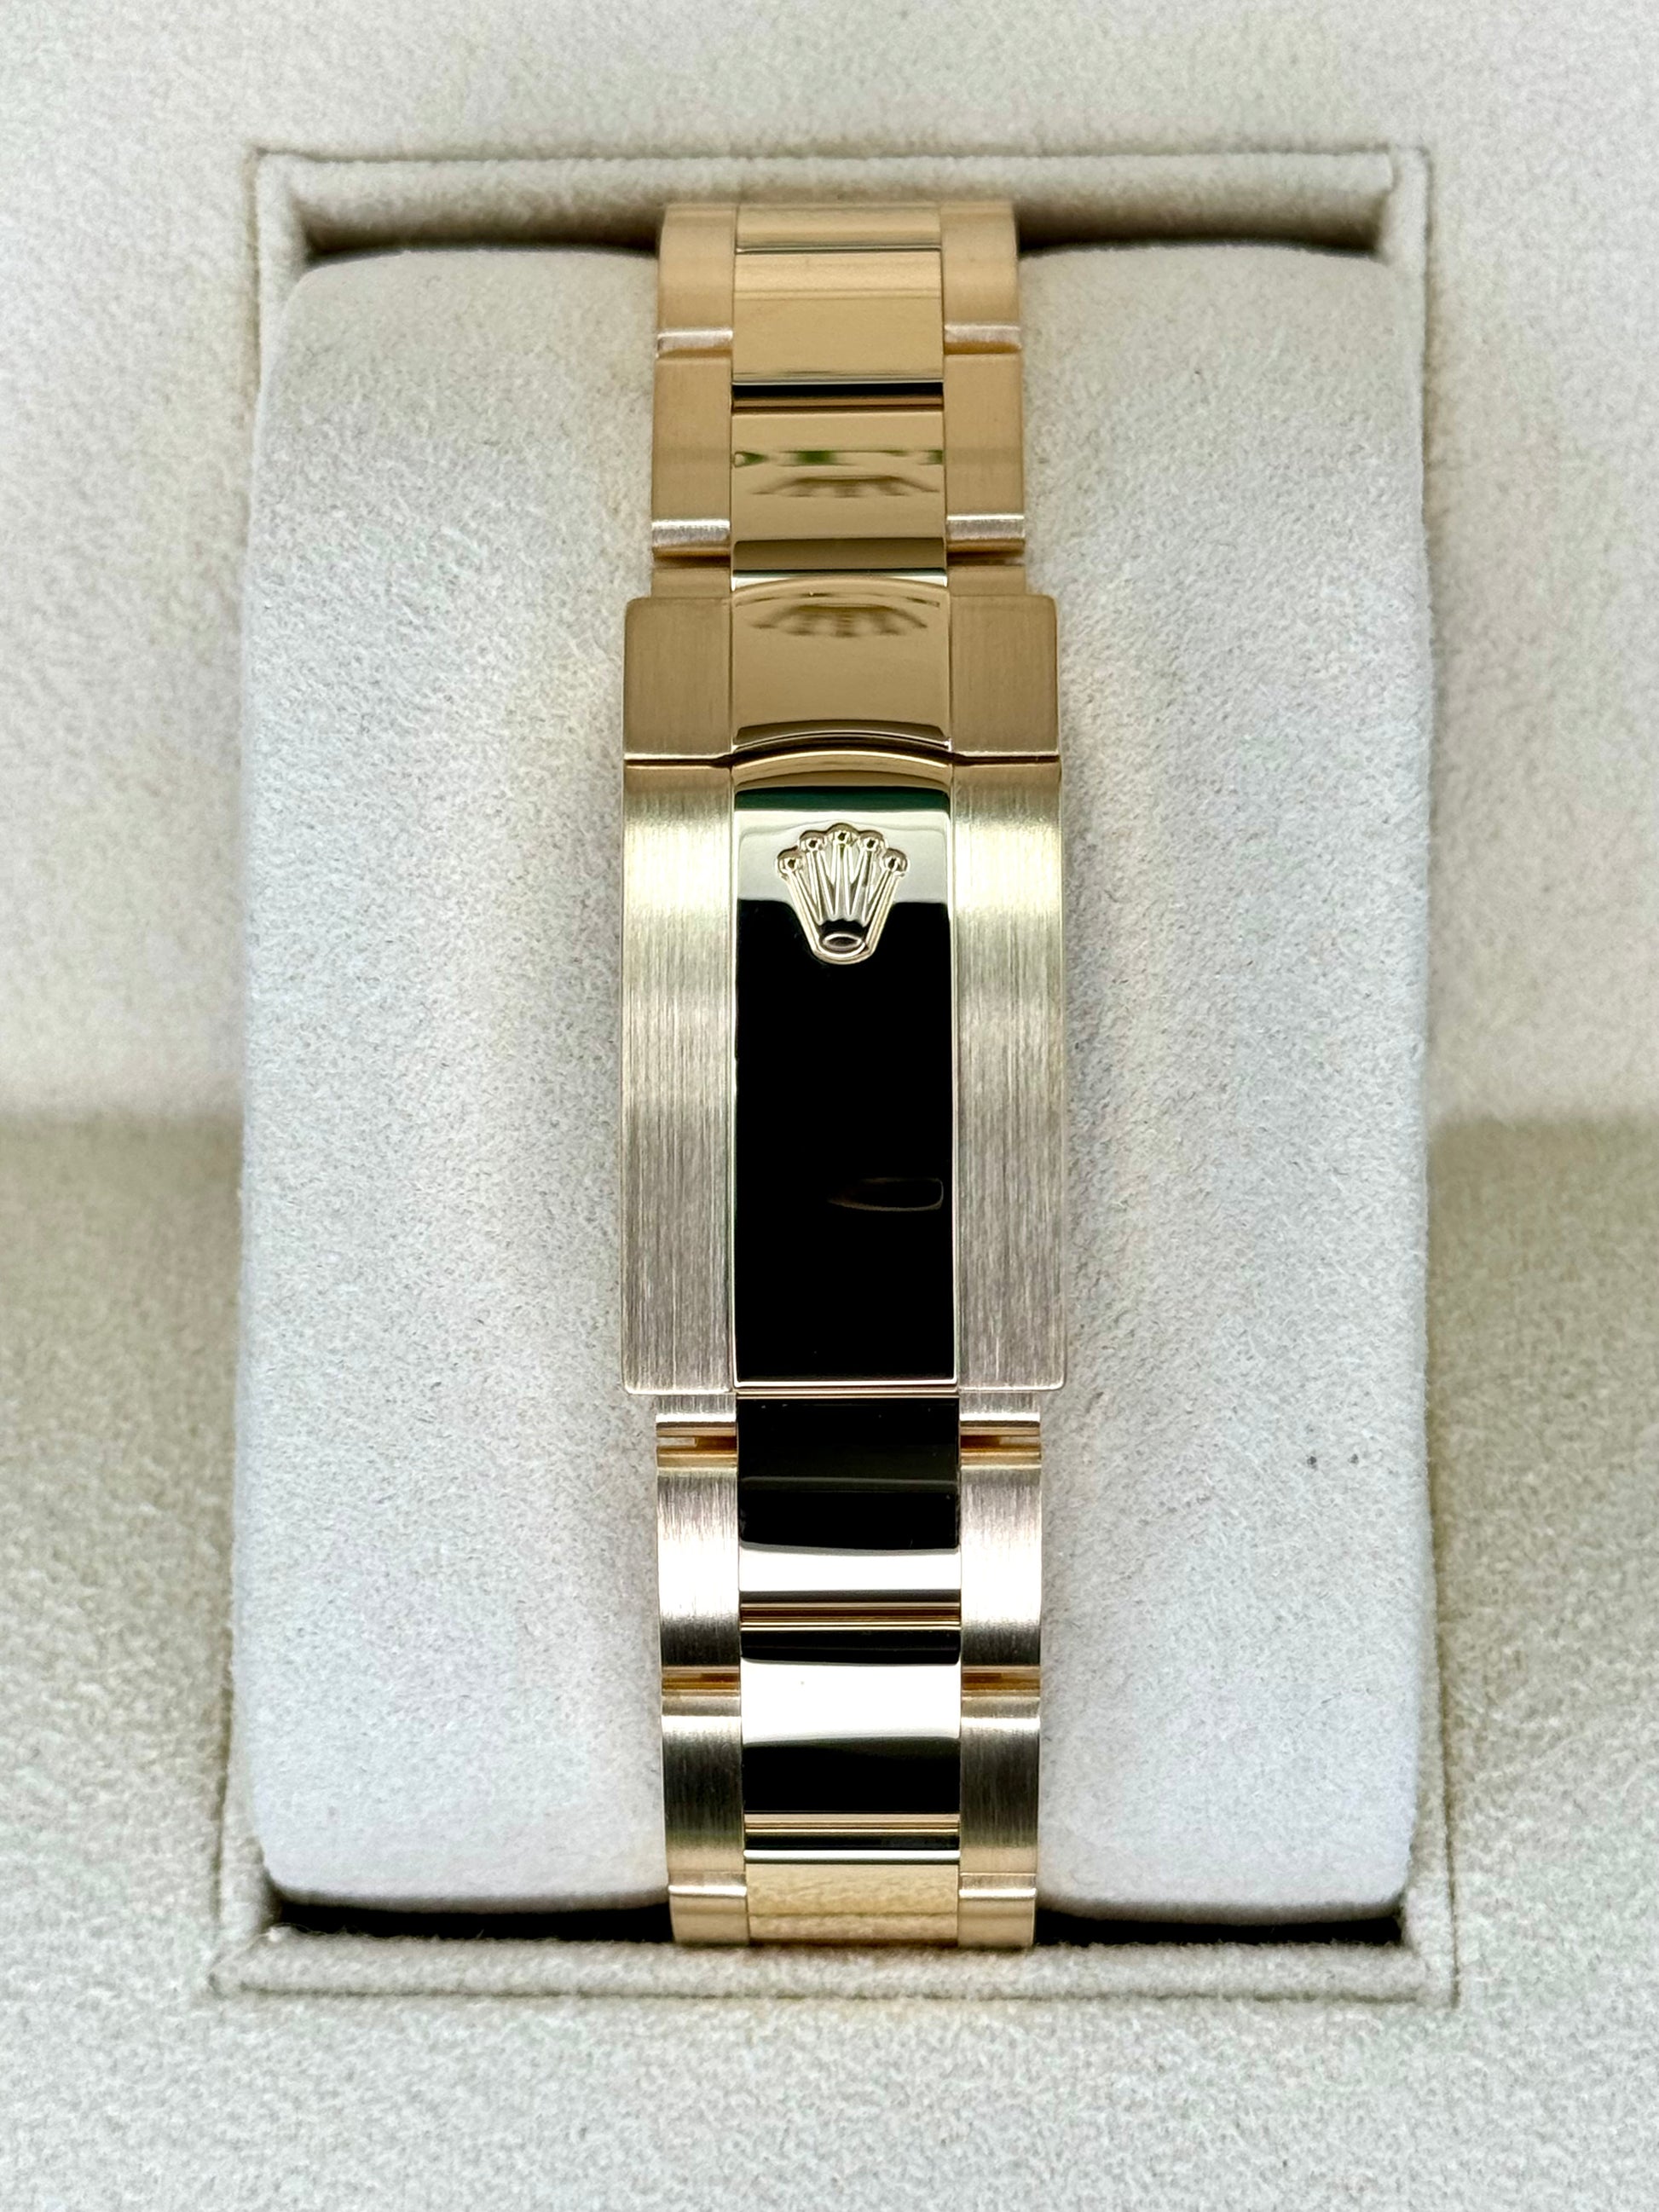 2022 Rolex Sky-Dweller 42mm 326938 Yellow Gold White Dial - MyWatchLLC